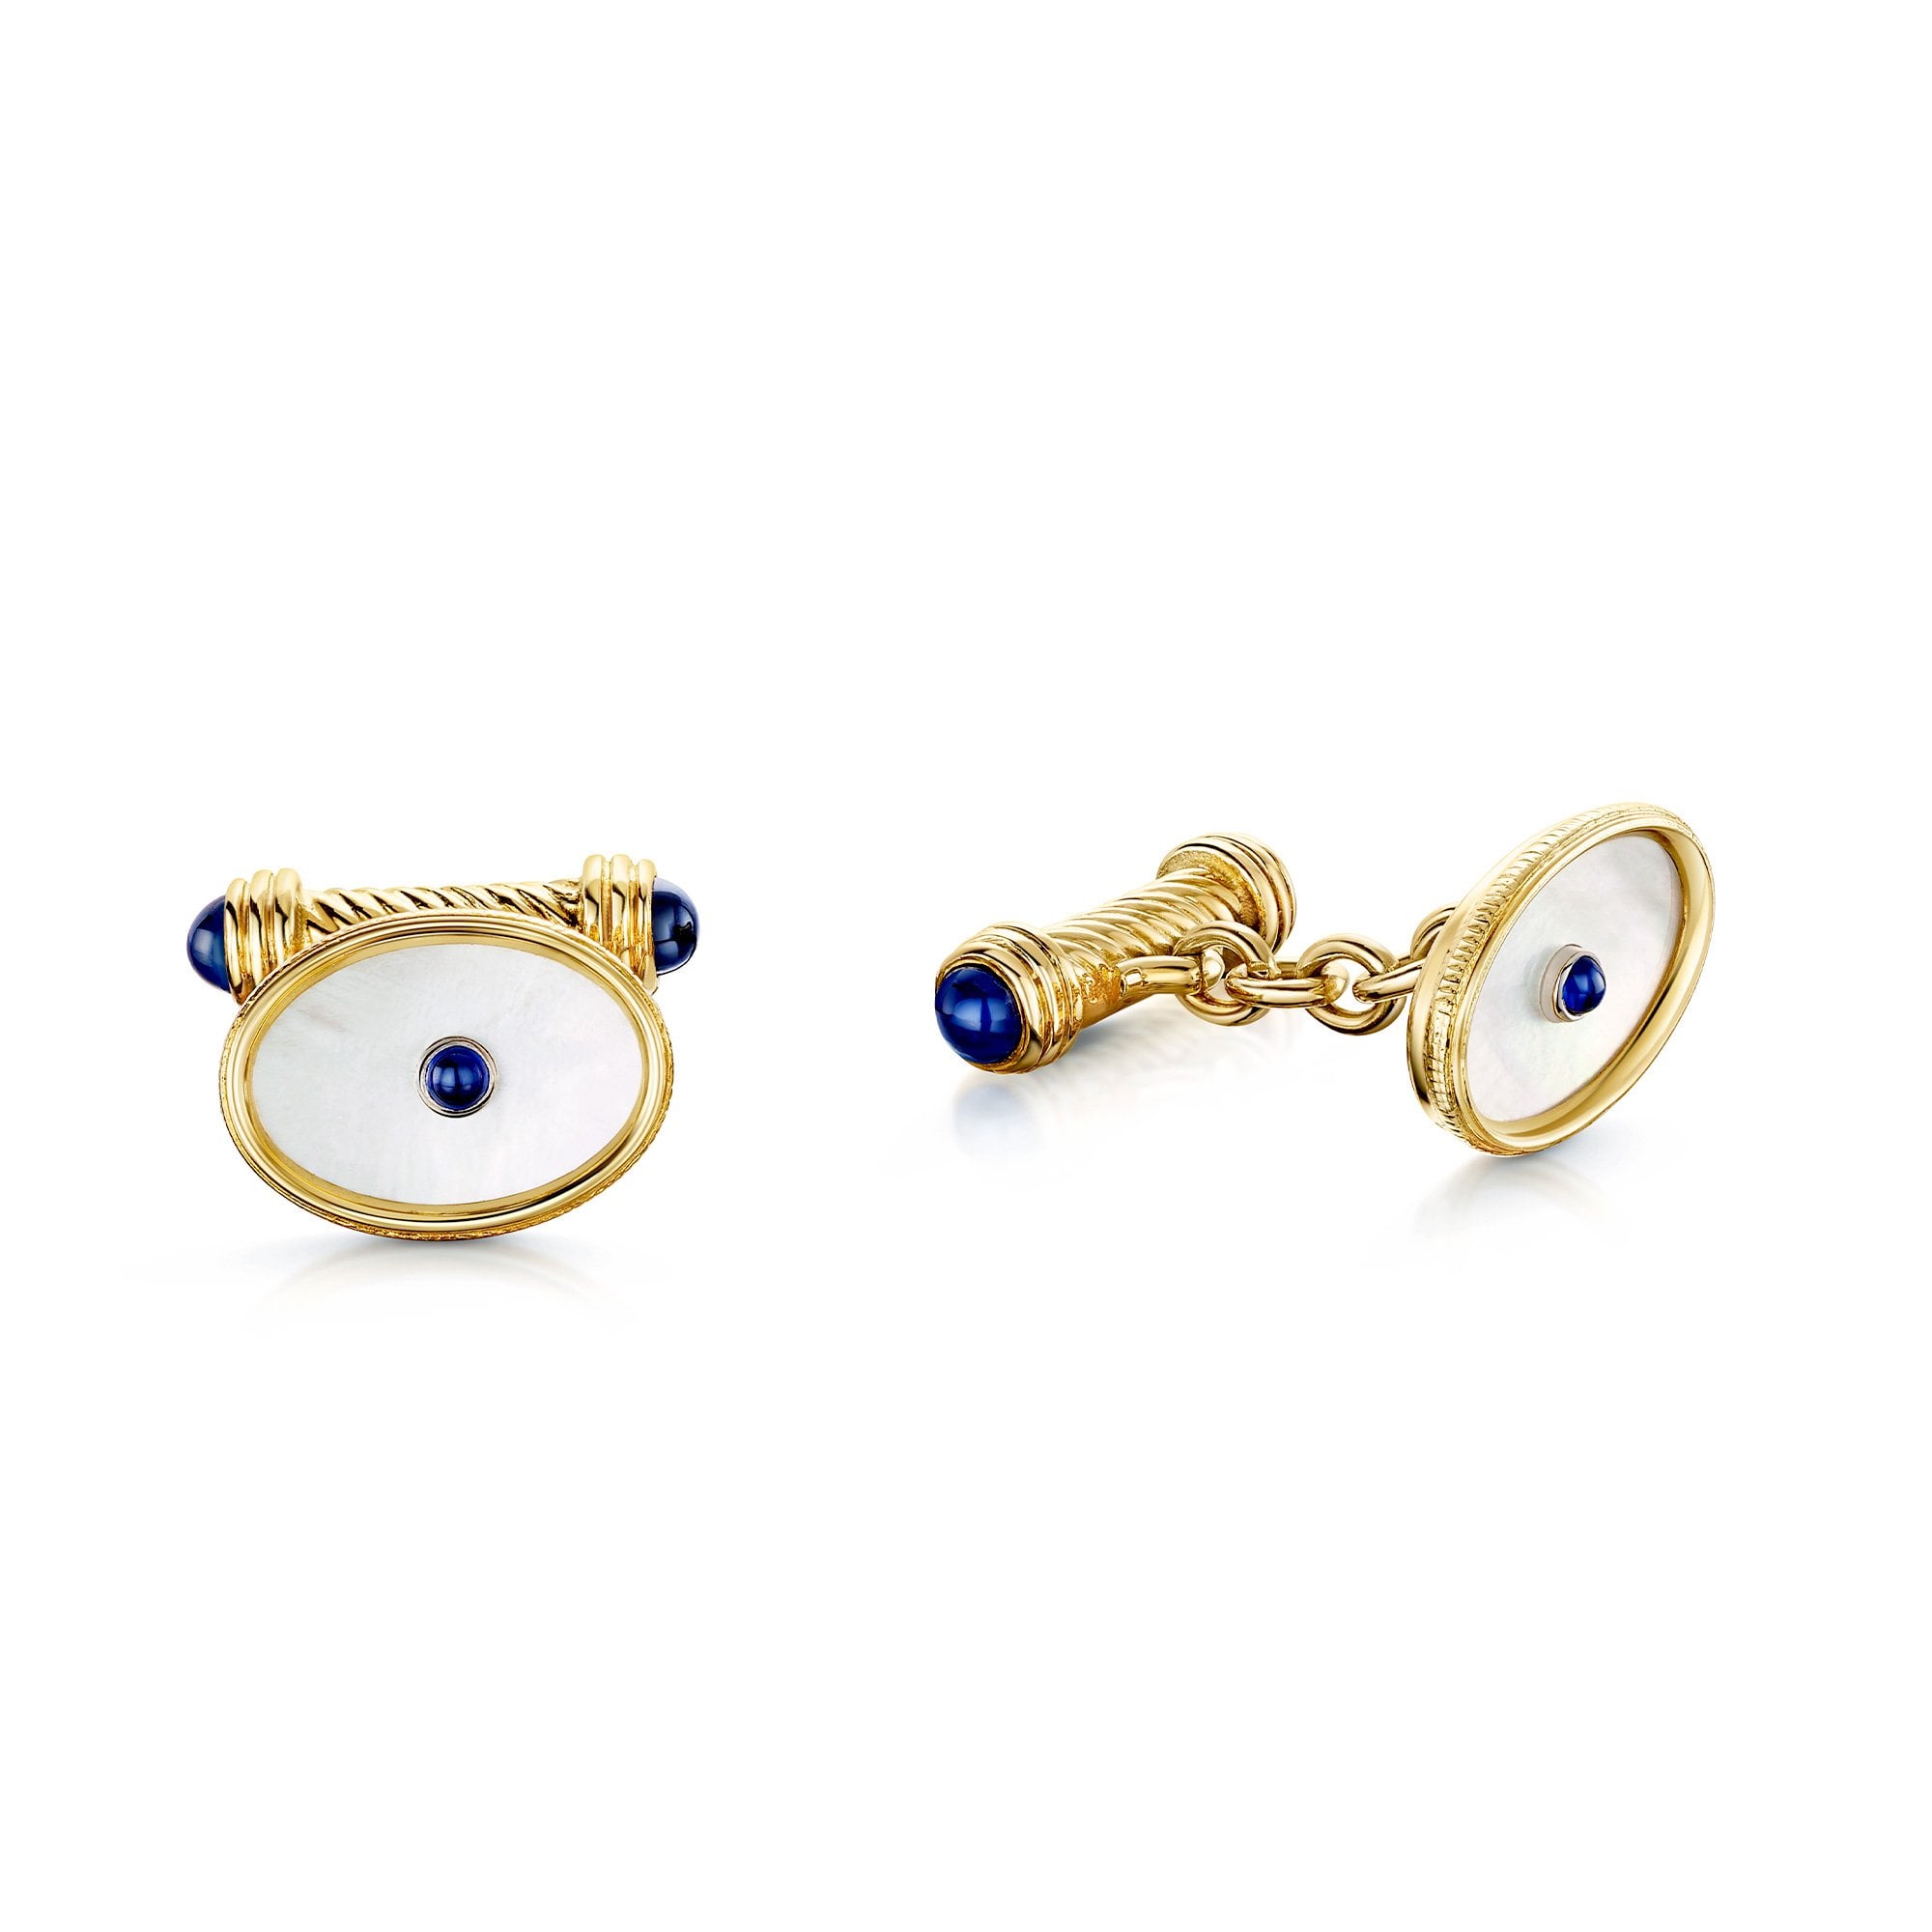 18ct Yellow Gold Oval Cufflinks Set With Mother Of Pearl And Cabouchon Sapphires